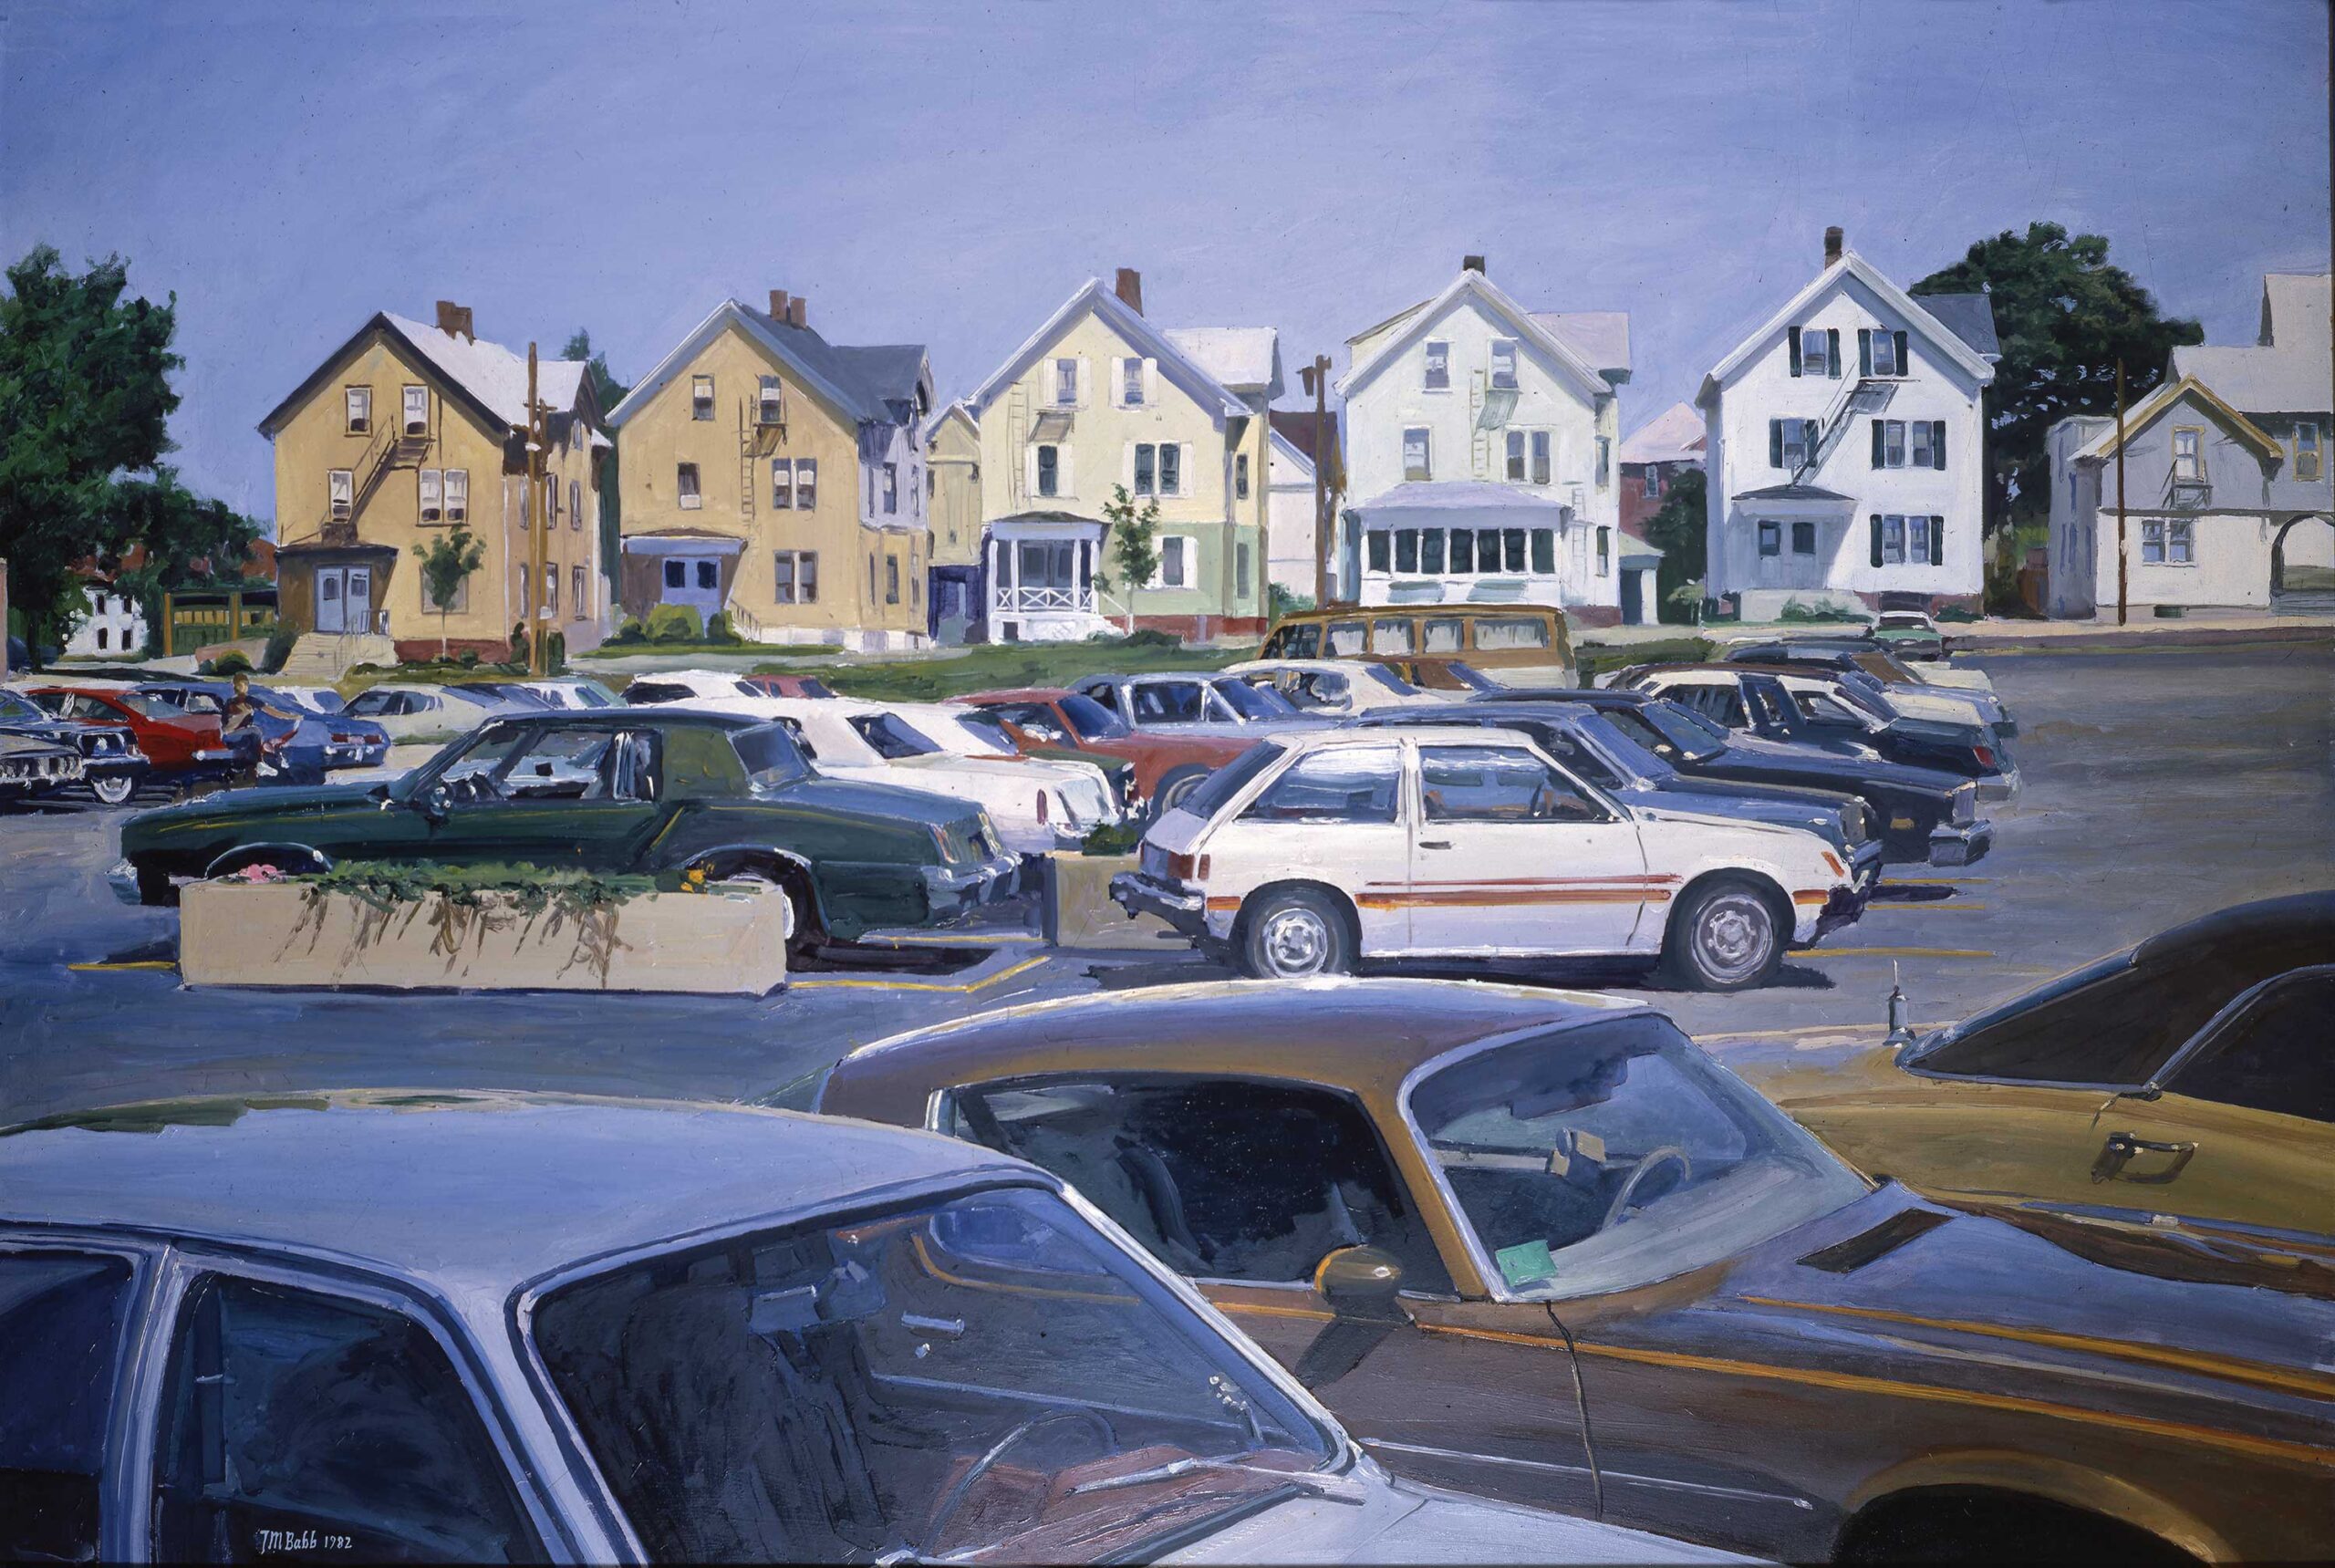 Contemporary realism - Joel Babb, "Automotive US," 1982, oil on panel, 30 x 45 in., collection of Susanna Fichera